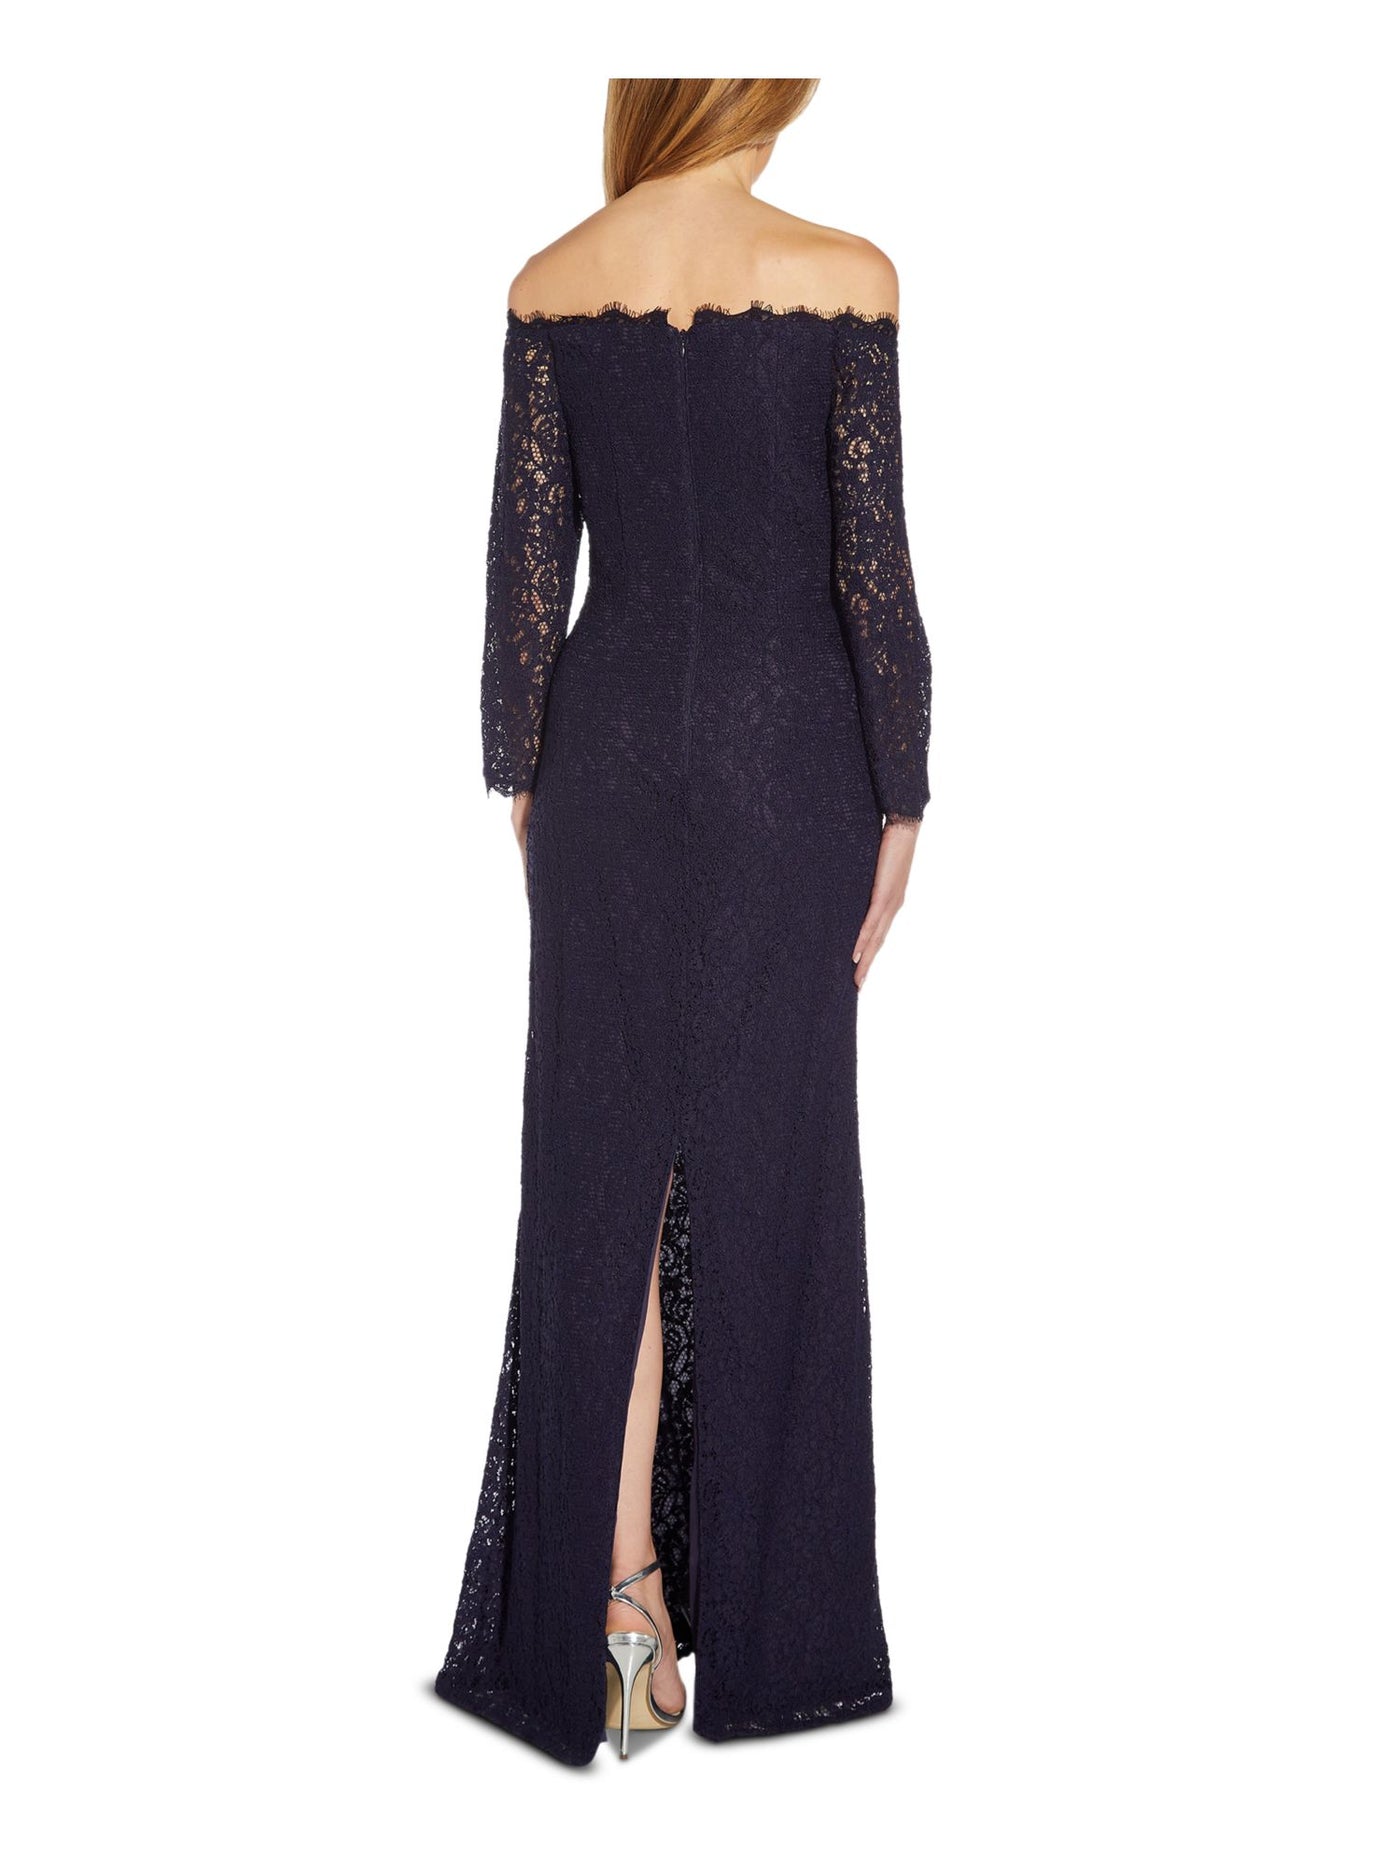 ADRIANNA PAPELL Womens Navy Lace Zippered Lined Long Sleeve Strapless Full-Length Cocktail Sheath Dress 14